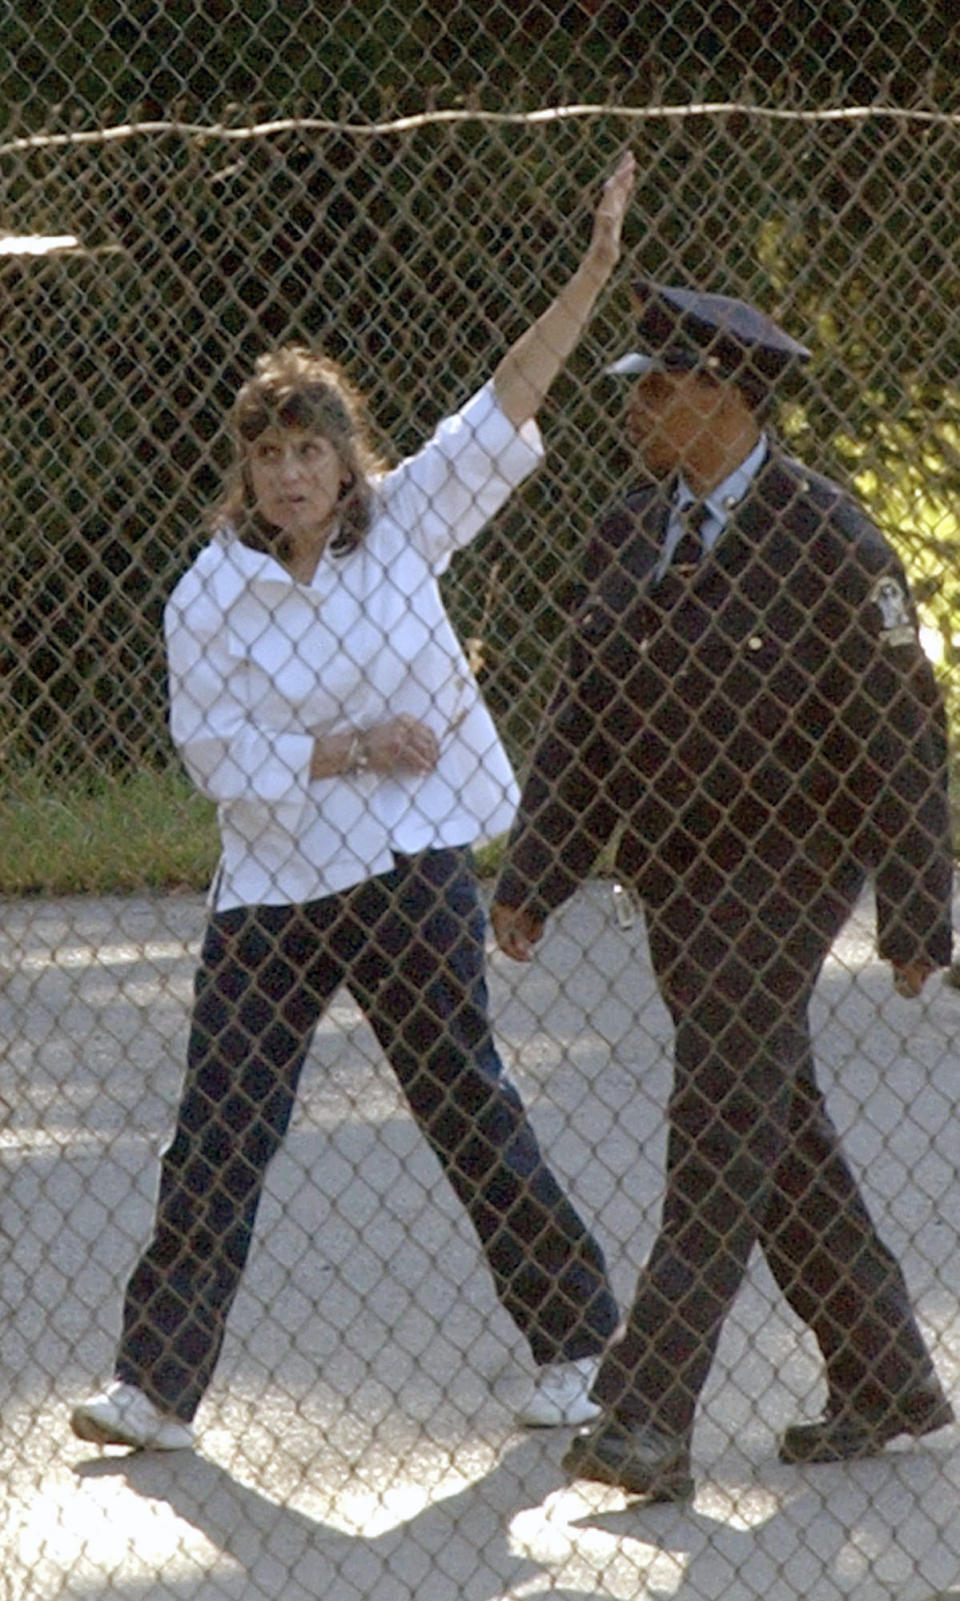 FILE - Kathy Boudin, left, waves as she leaves the Bedford Hills Correctional Facility escorted by a corrections officer, Sept. 17, 2003 in Bedford Hills, N.Y. Boudin, a former member of the radical Weather Underground who spent more than two decades in prison for her role in a fatal 1981 armored truck robbery and then spent decades helping other inmates, has died, Sunday, May 1, 2022, at age 78. (AP Photo/Mary Altaffer, File)